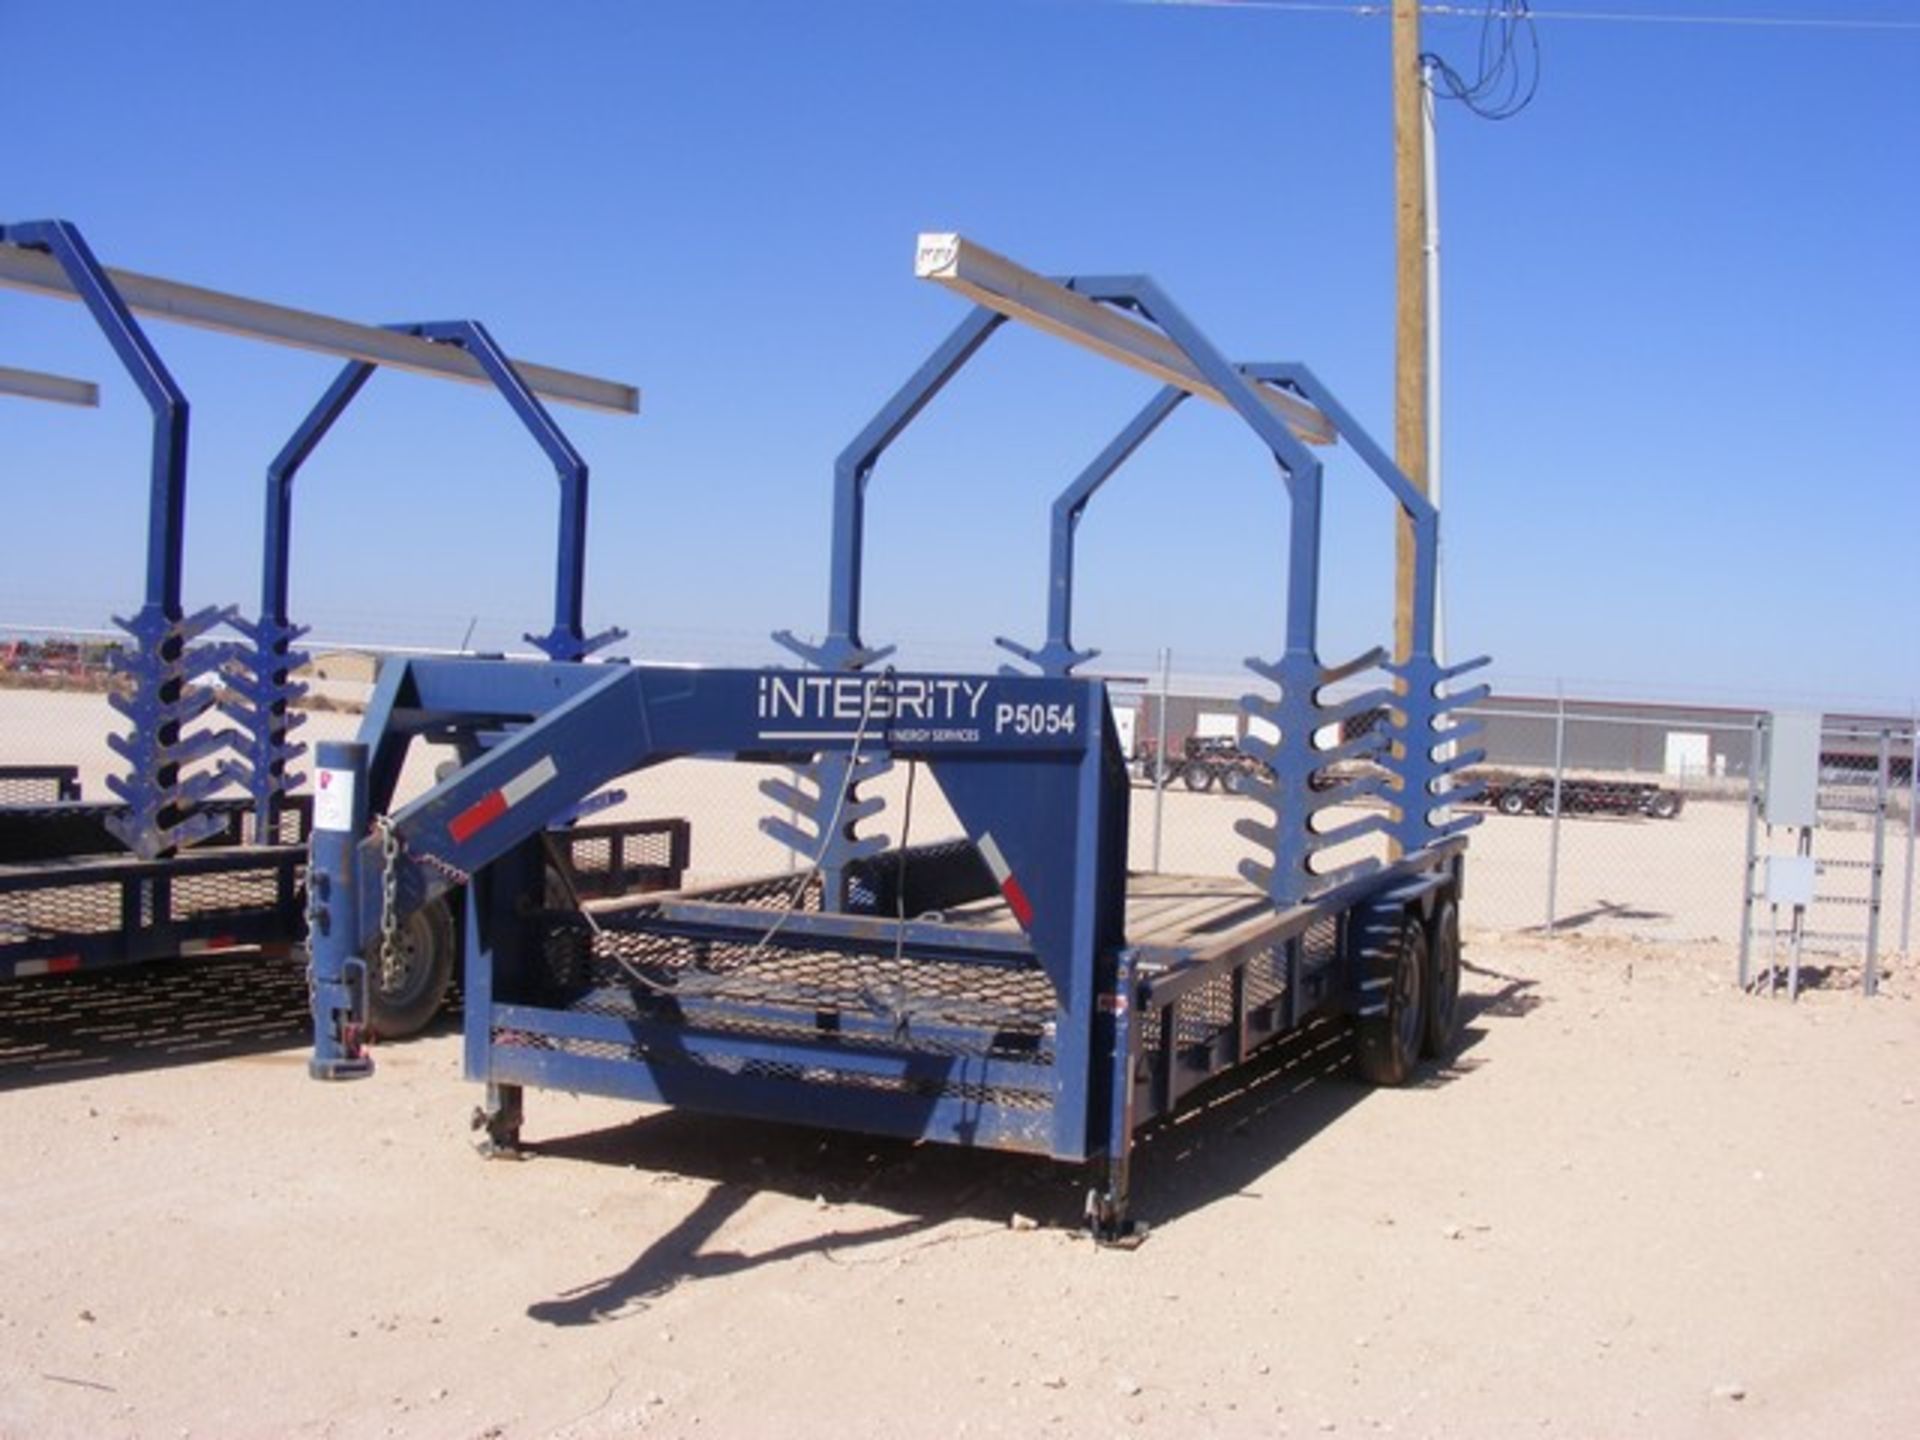 Located in YARD 1 - Midland, TX (P5054) (2360) (X) 2019 PULL DO T/A COMBO MONORAIL/ TOOL TRAILER,